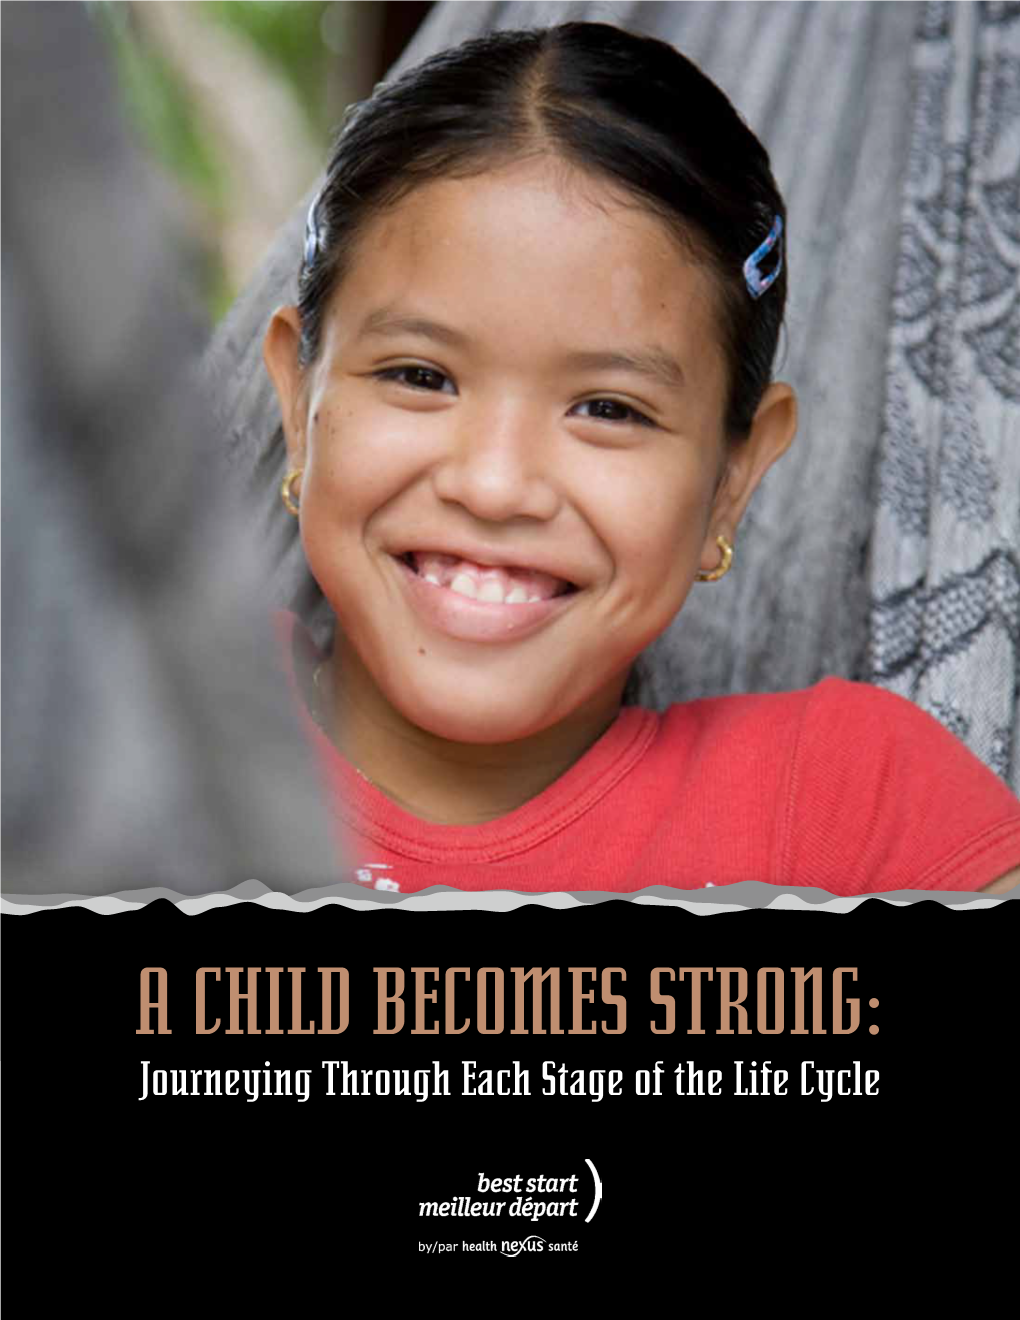 A CHILD BECOMES STRONG: Journeying Through Each Stage of the Life Cycle a CHILD BECOMES STRONG: Journeying Through Each Stage of the Life Cycle 2010